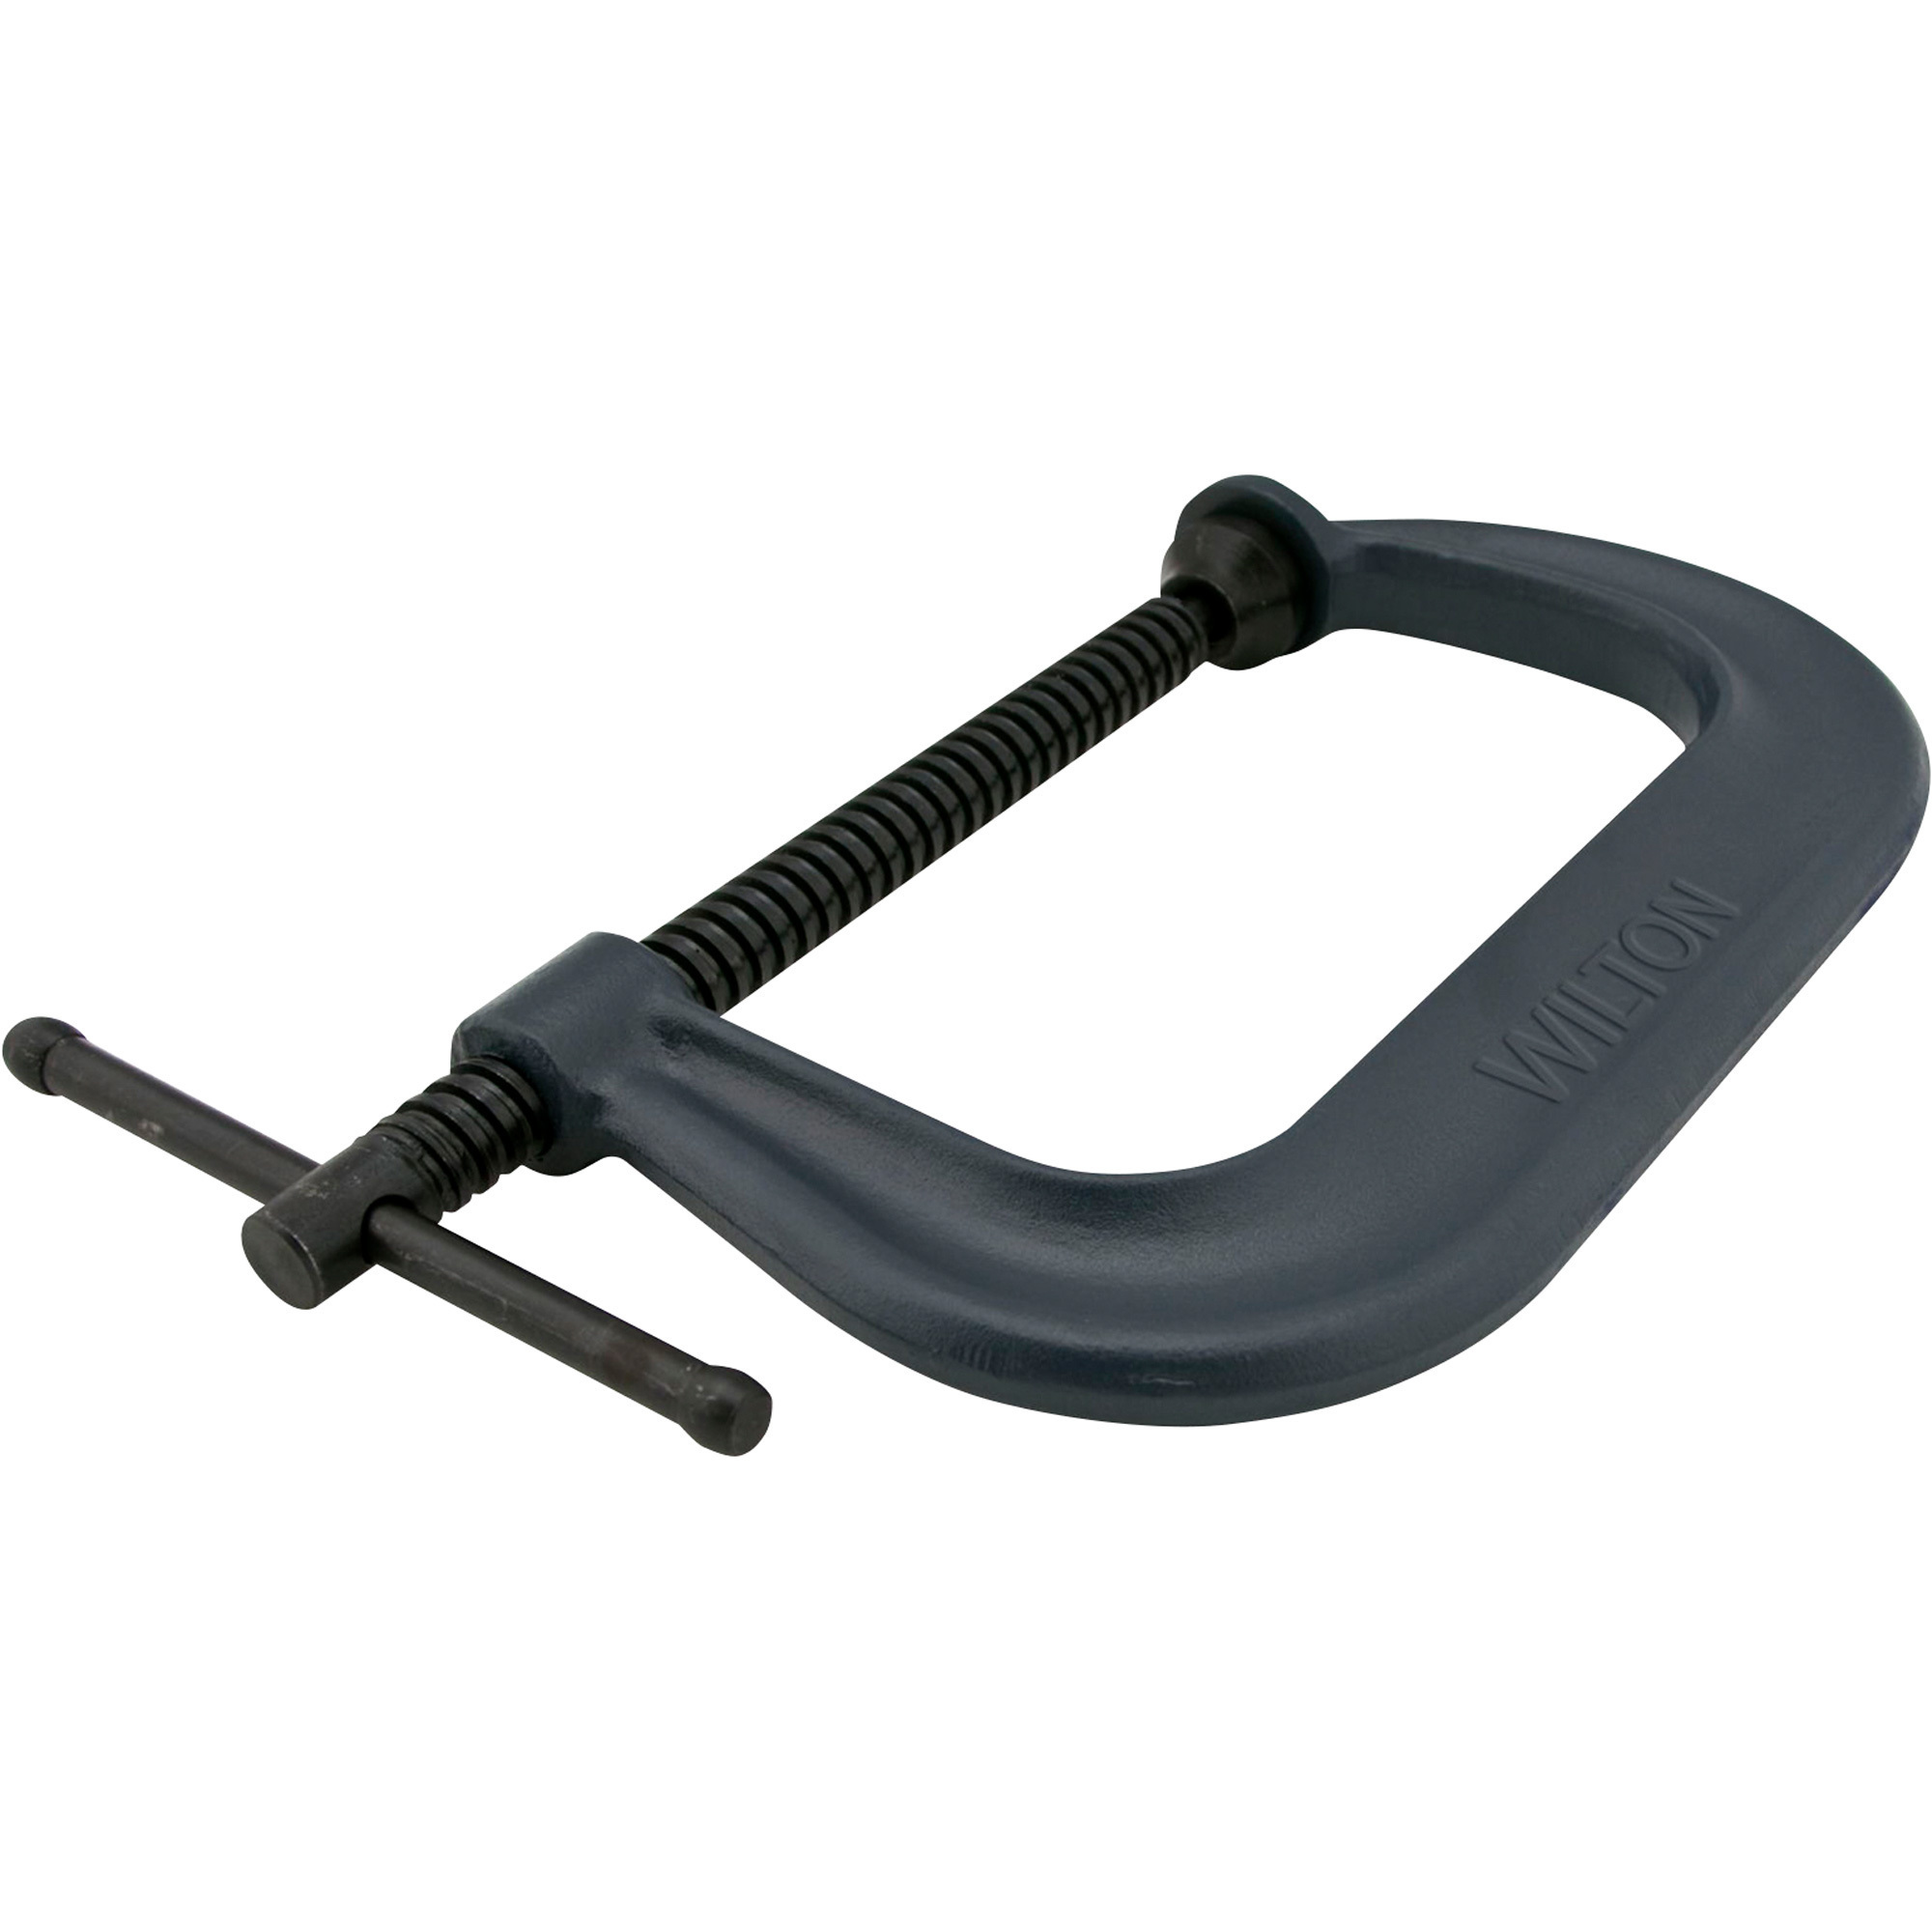 Wilton Classic 400 Series C-Clamp, 0-6 1/16Inch Opening, Model 406